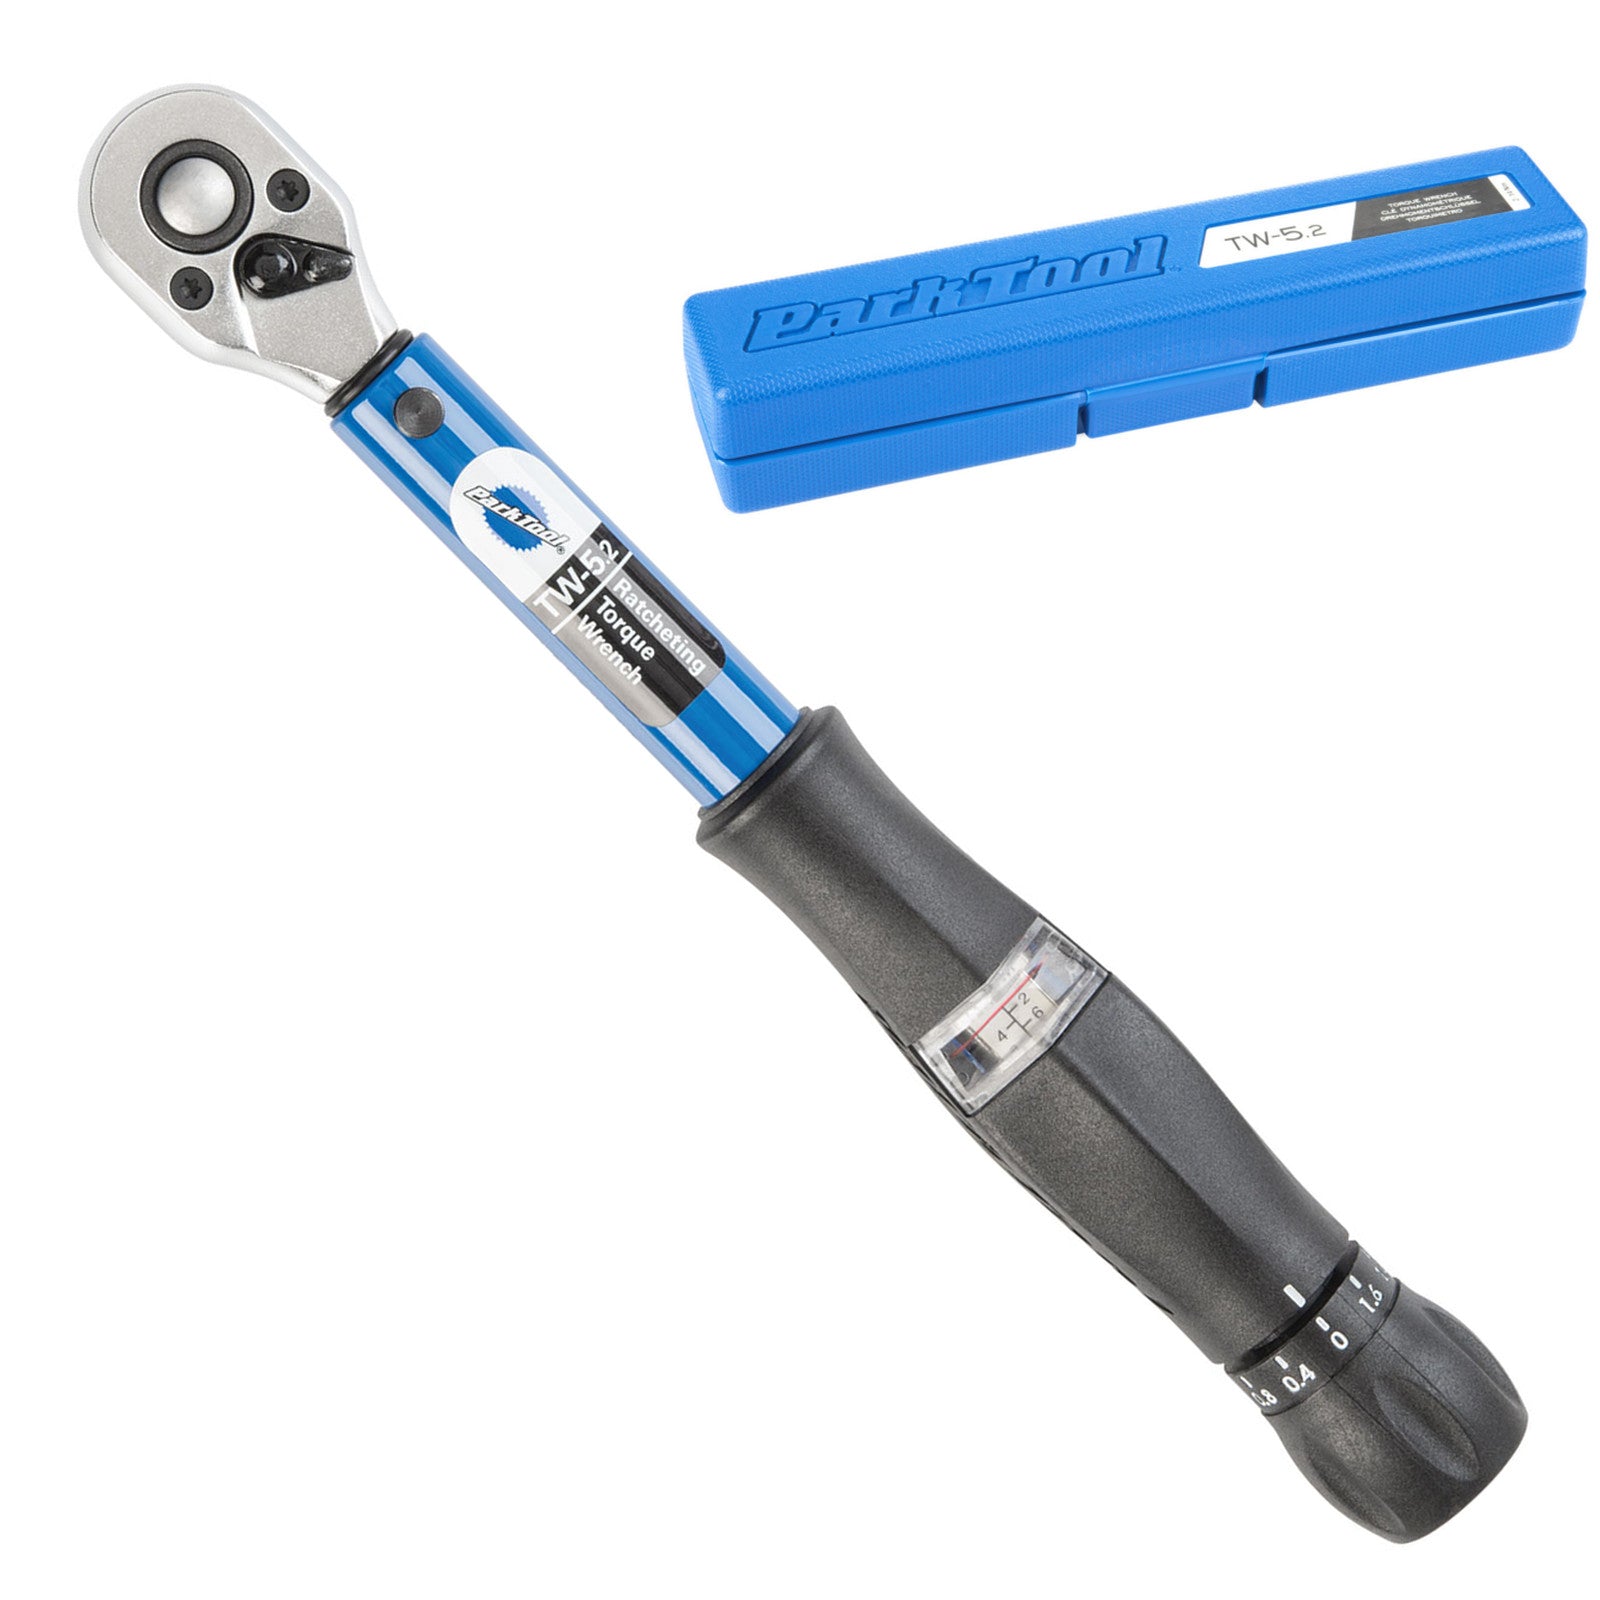 Park Tool TW-5.2 Torque Wrench 2-14Nm 3/8" Drive